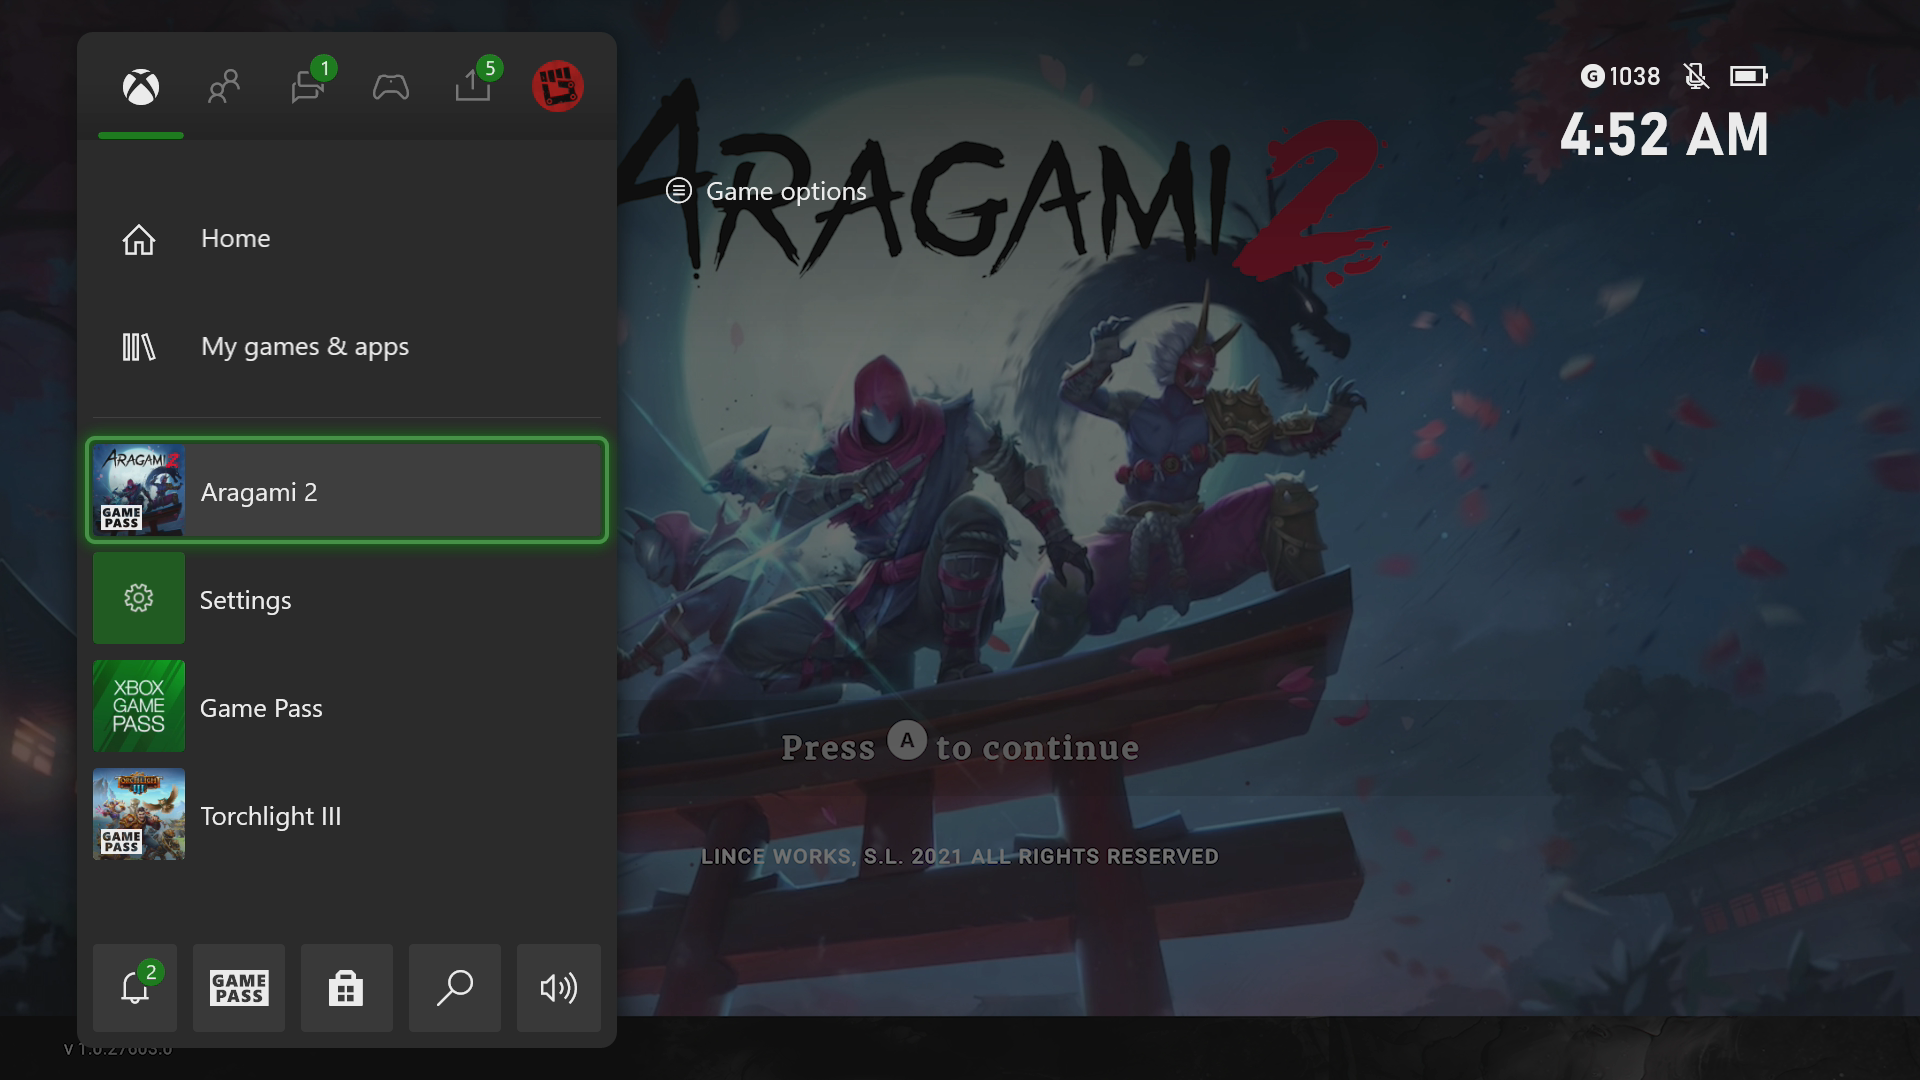 What to do when Aragami 2 keeps on crashing on your Xbox Series X